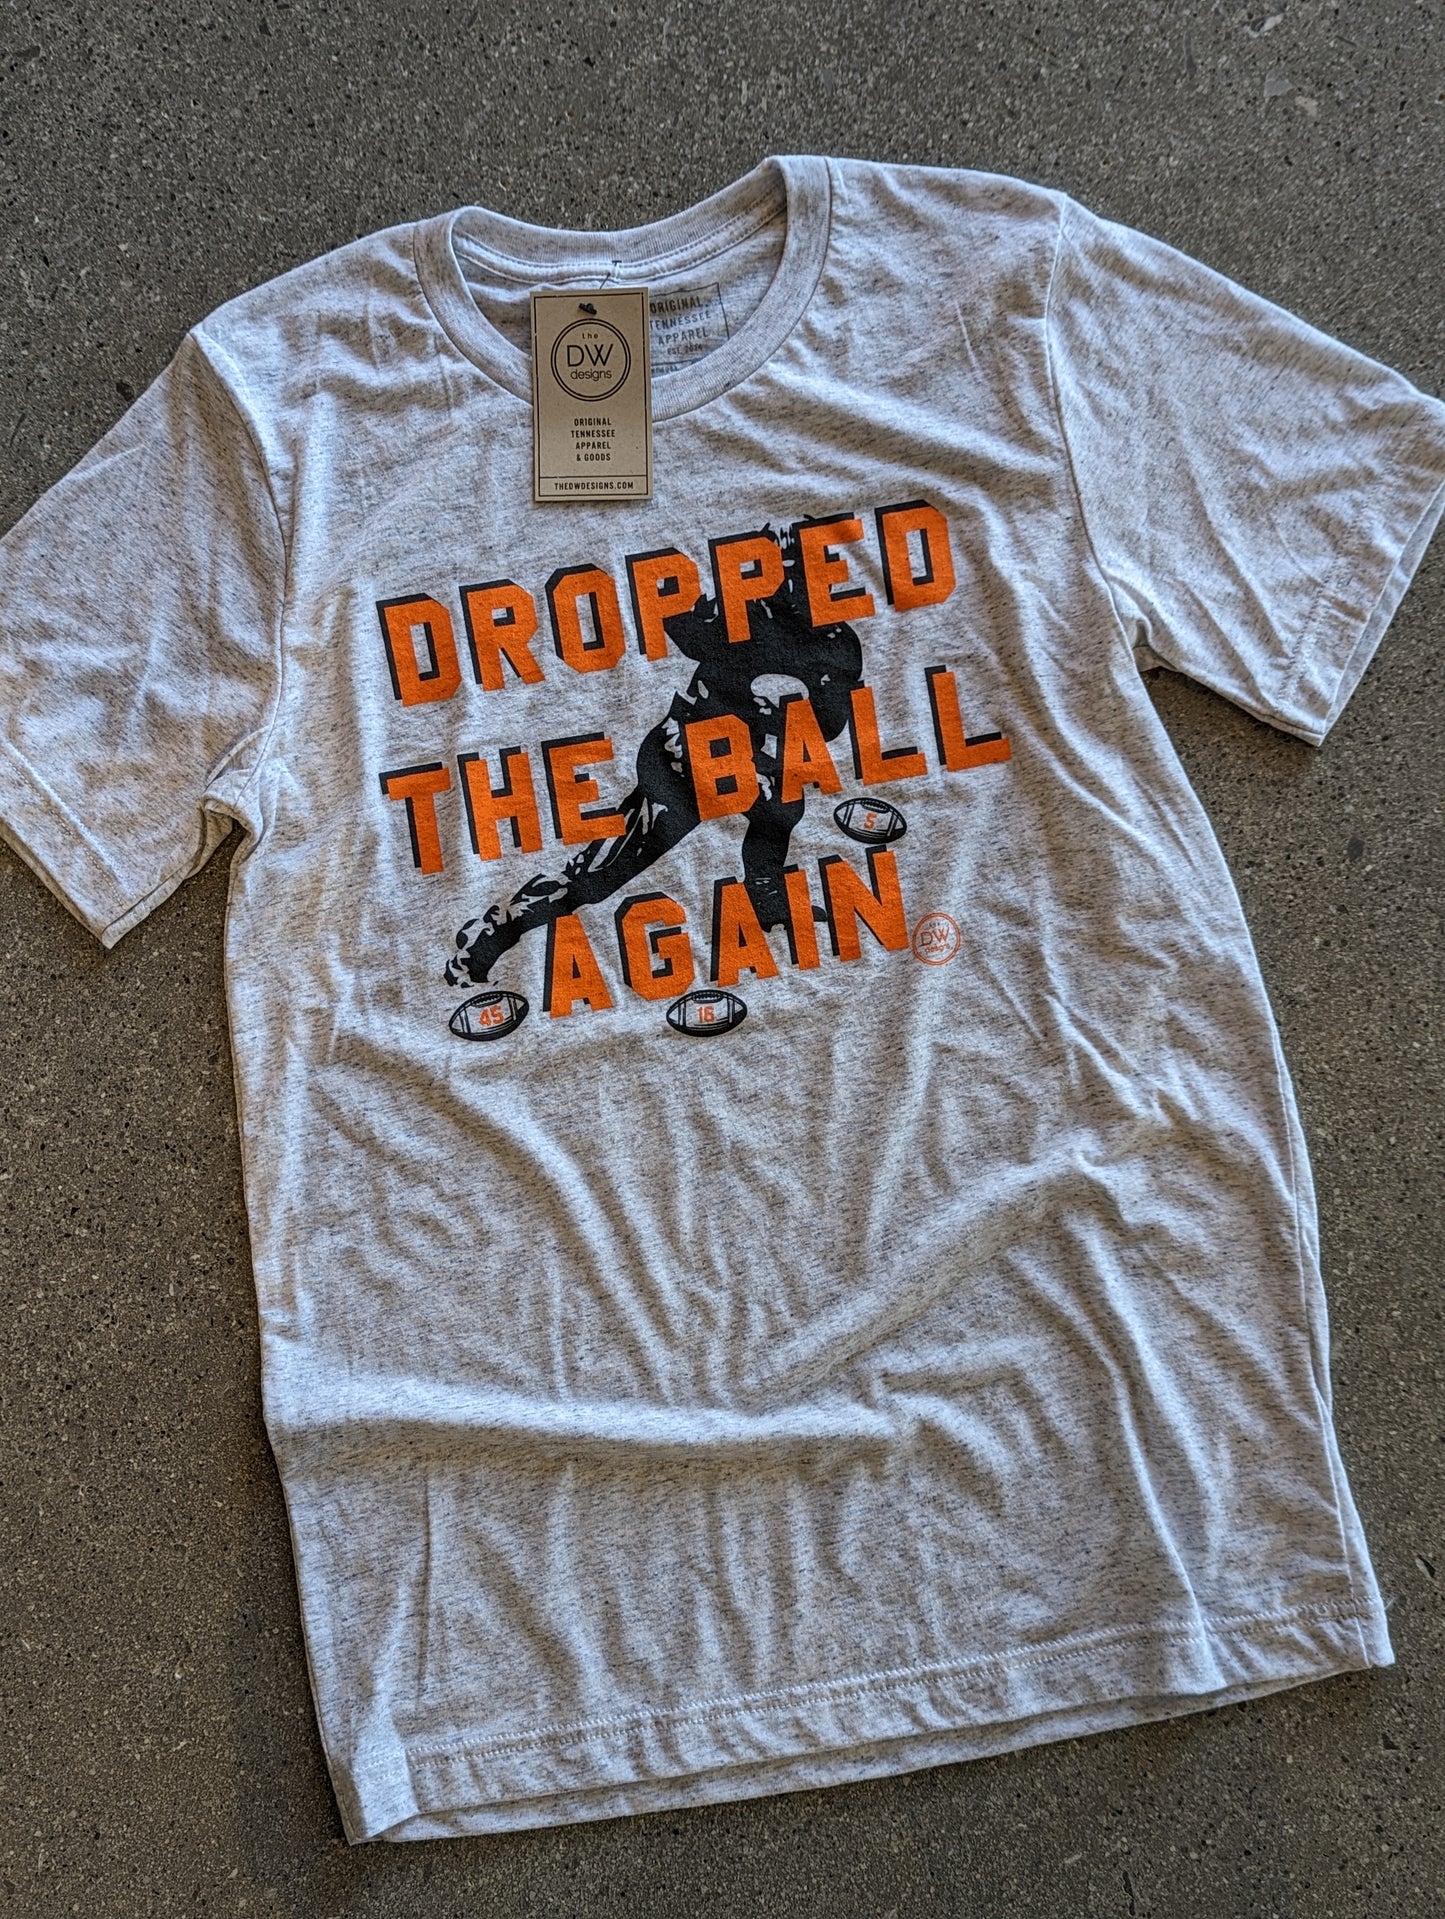 The Dropped The Ball Tee